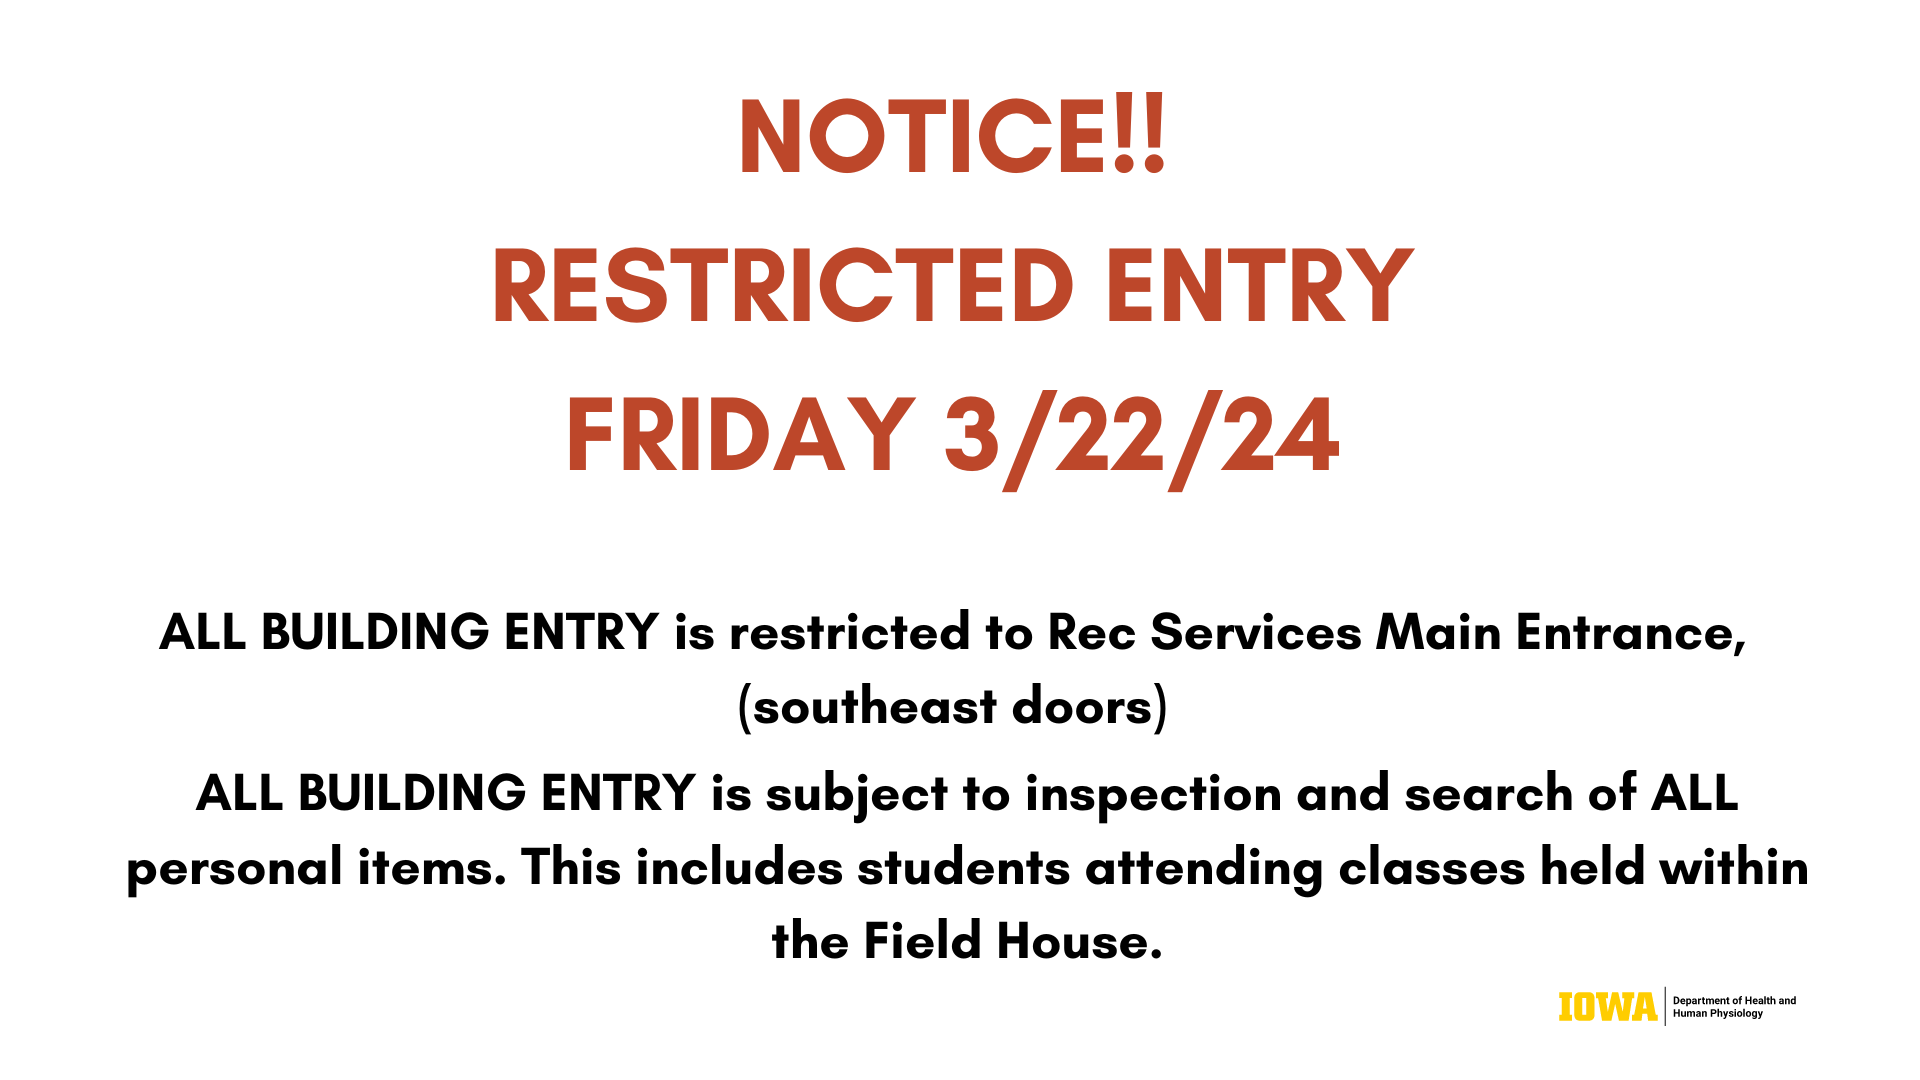 Notice! Restricted entry Friday (3/22/24)